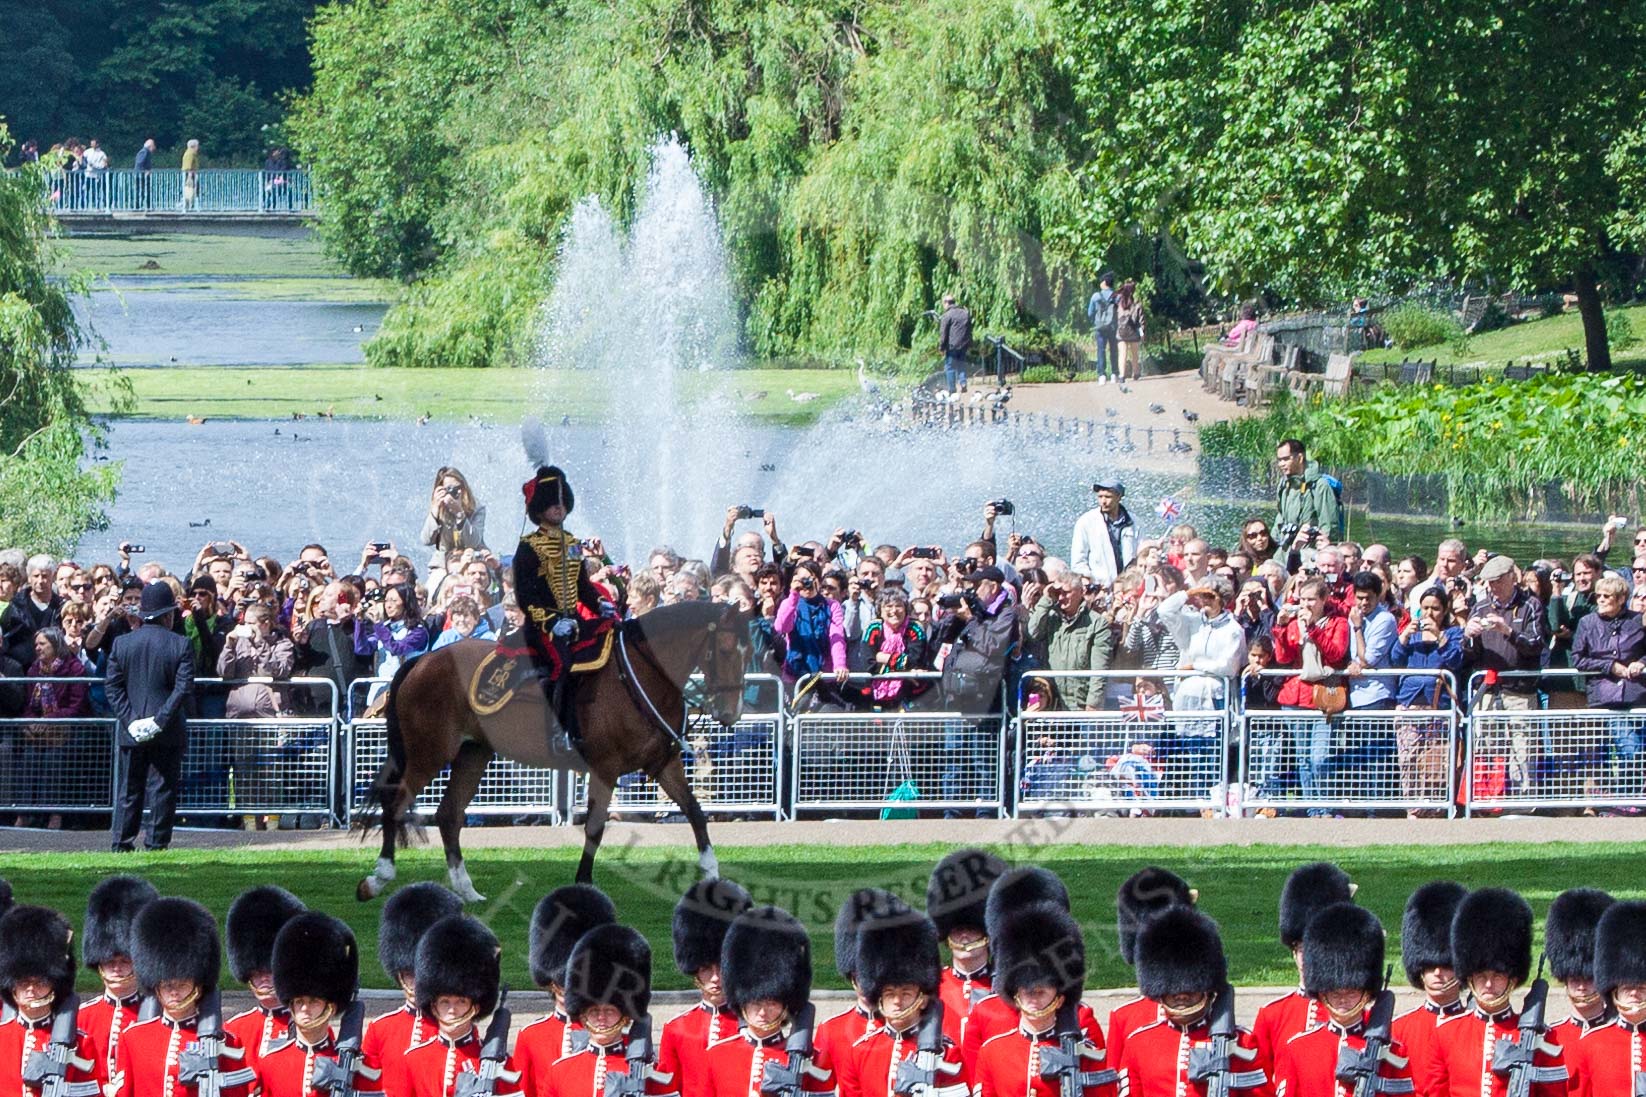 Trooping the Colour 2013: The King's Troop Royal Horse Artillery arrives, and will take position between No. 1 Guard and St. James's Park. Image #147, 15 June 2013 10:39 Horse Guards Parade, London, UK